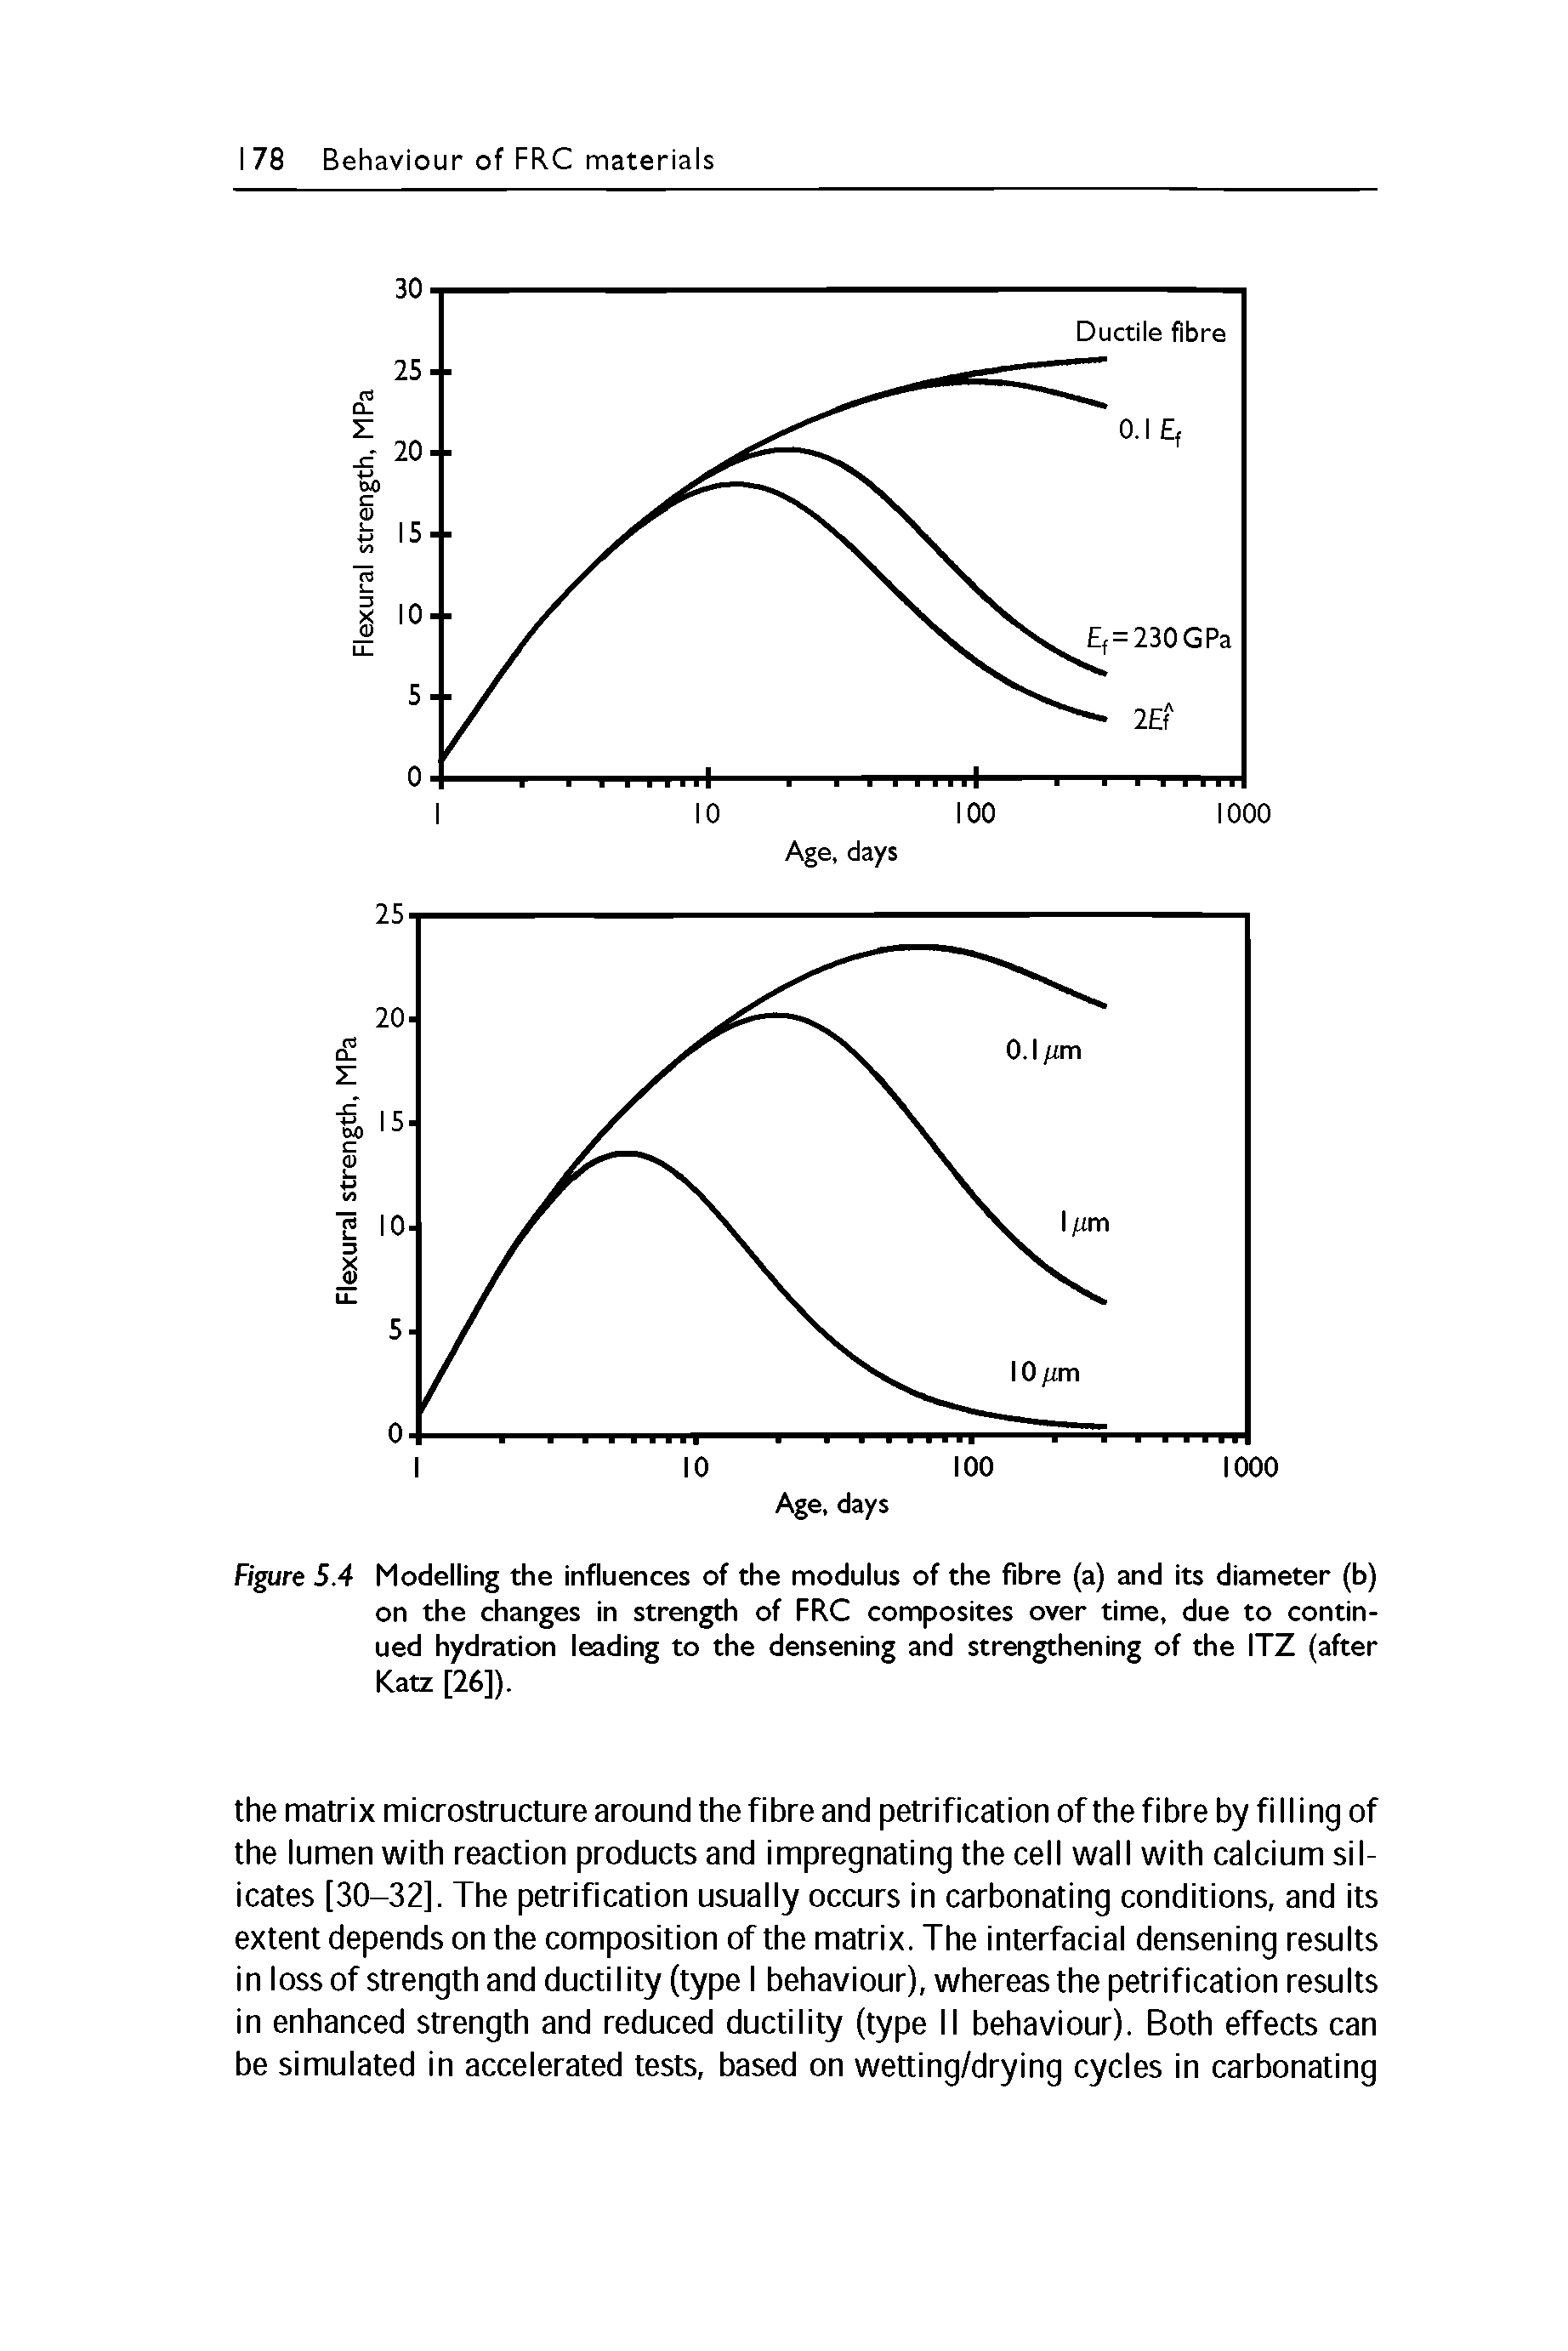 Figure 5.4 Modelling the influences of the modulus of the fibre (a) and its diameter (b) on the changes in strength of FRC composites over time, due to continued hydration leading to the densening and strengthening of the ITZ (after Katz [26]).